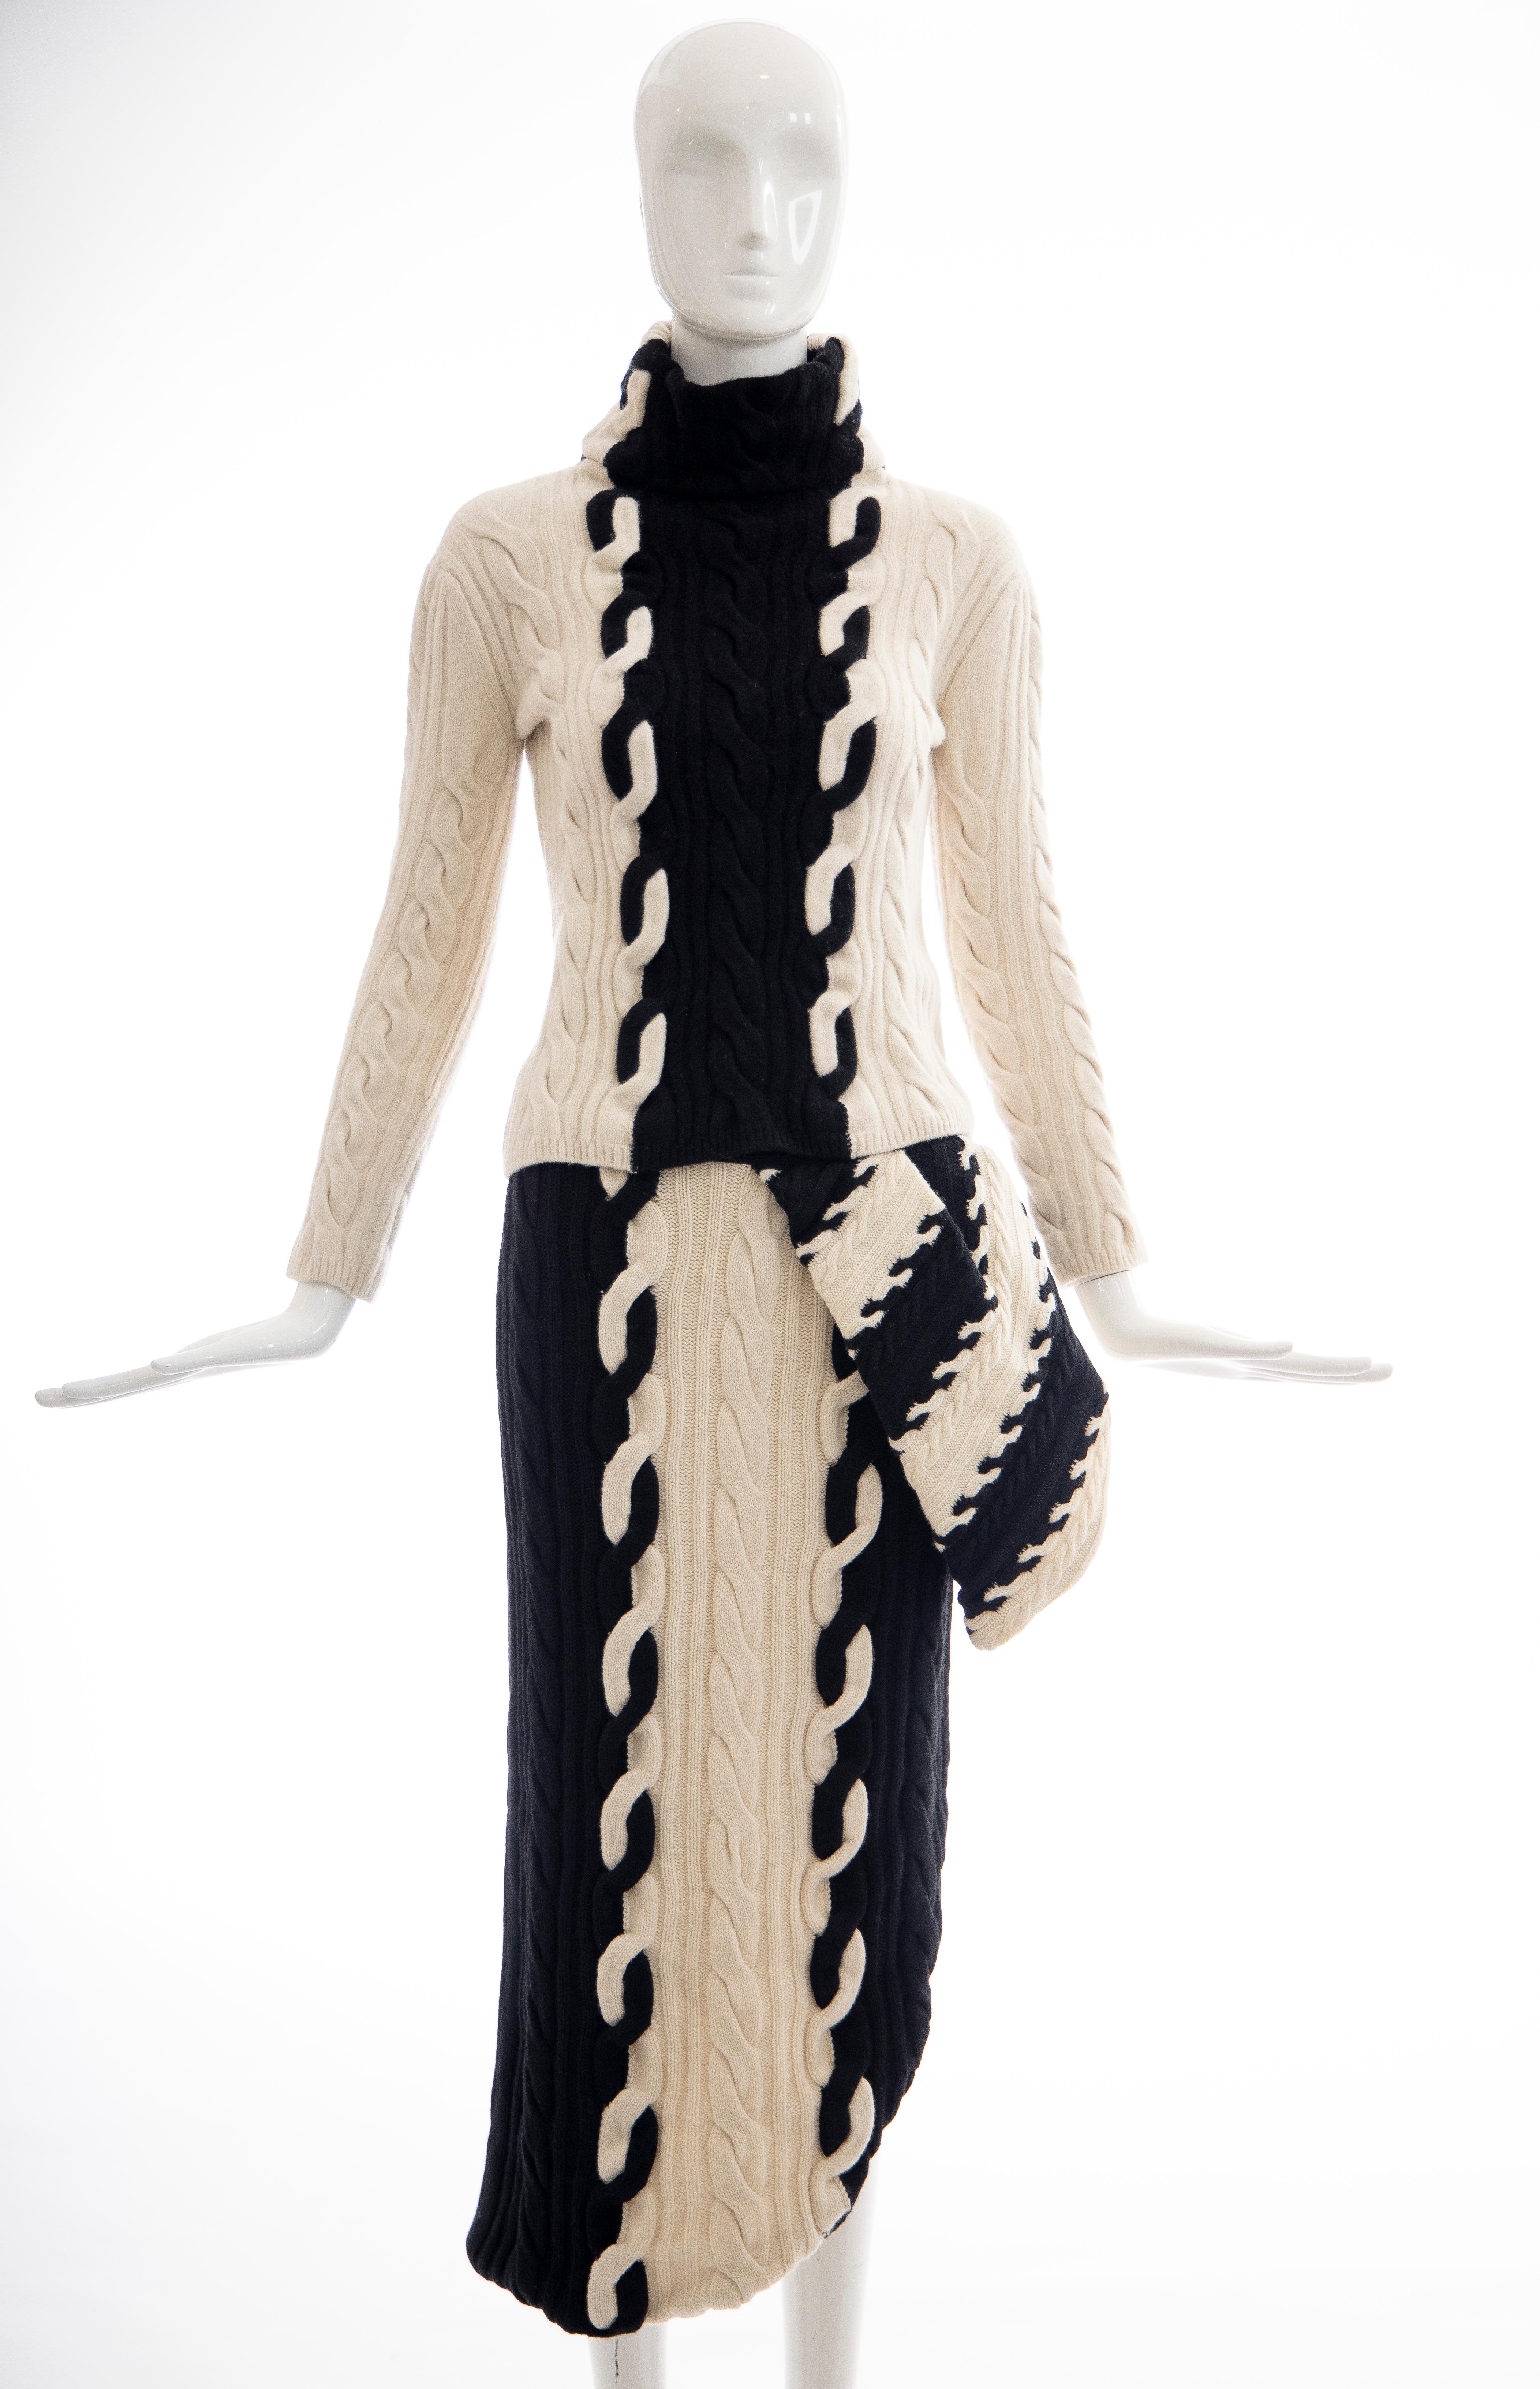 Raf Simons for Christian Dior Wool Cashmere Cable Knit Skirt-Suit, Fall 2013 9